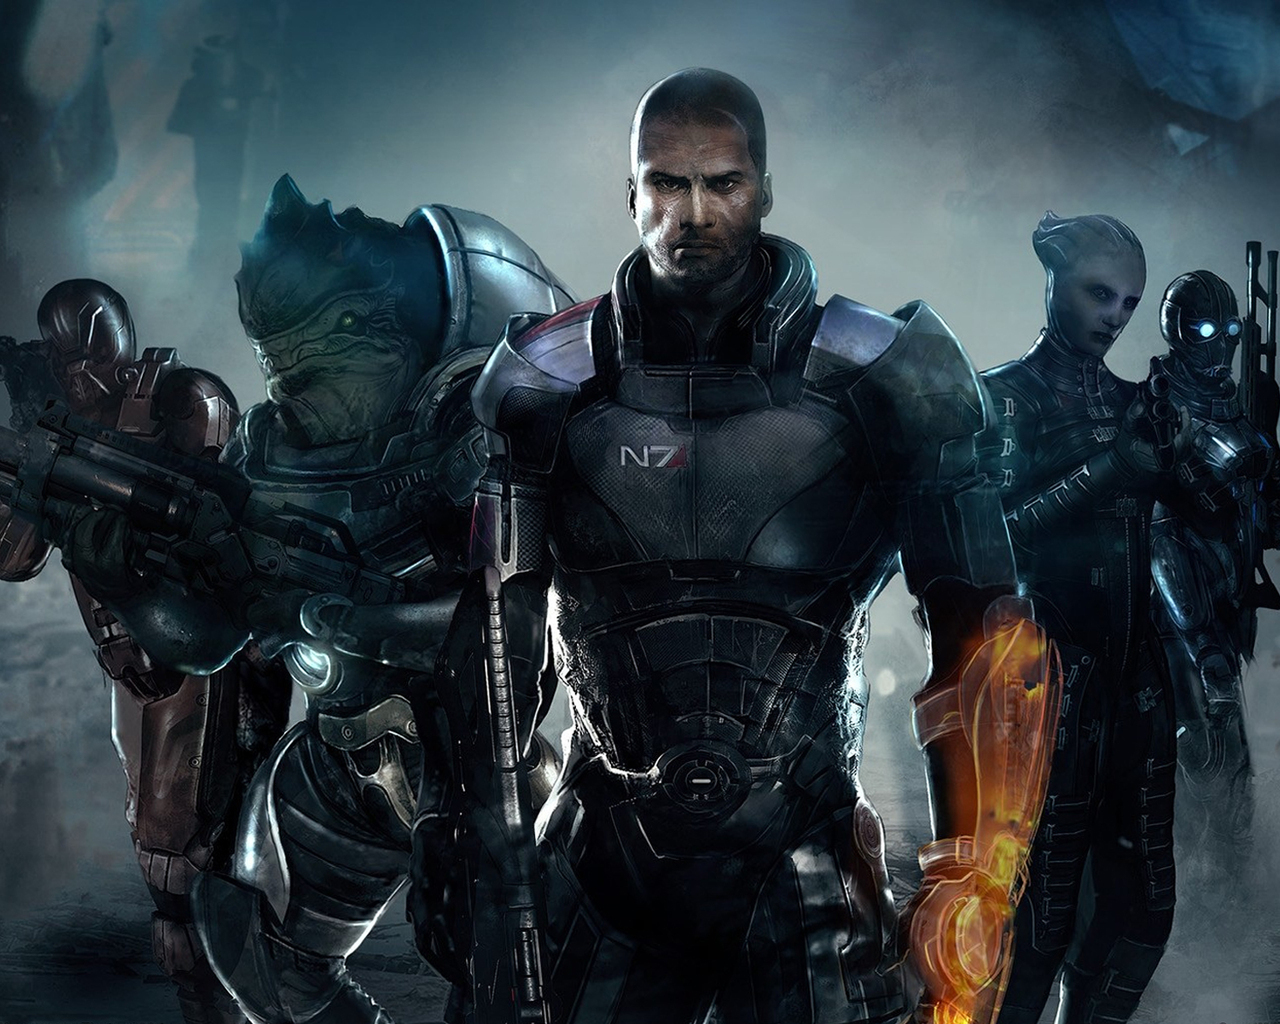 21671 download wallpaper games, mass effect, black screensavers and pictures for free